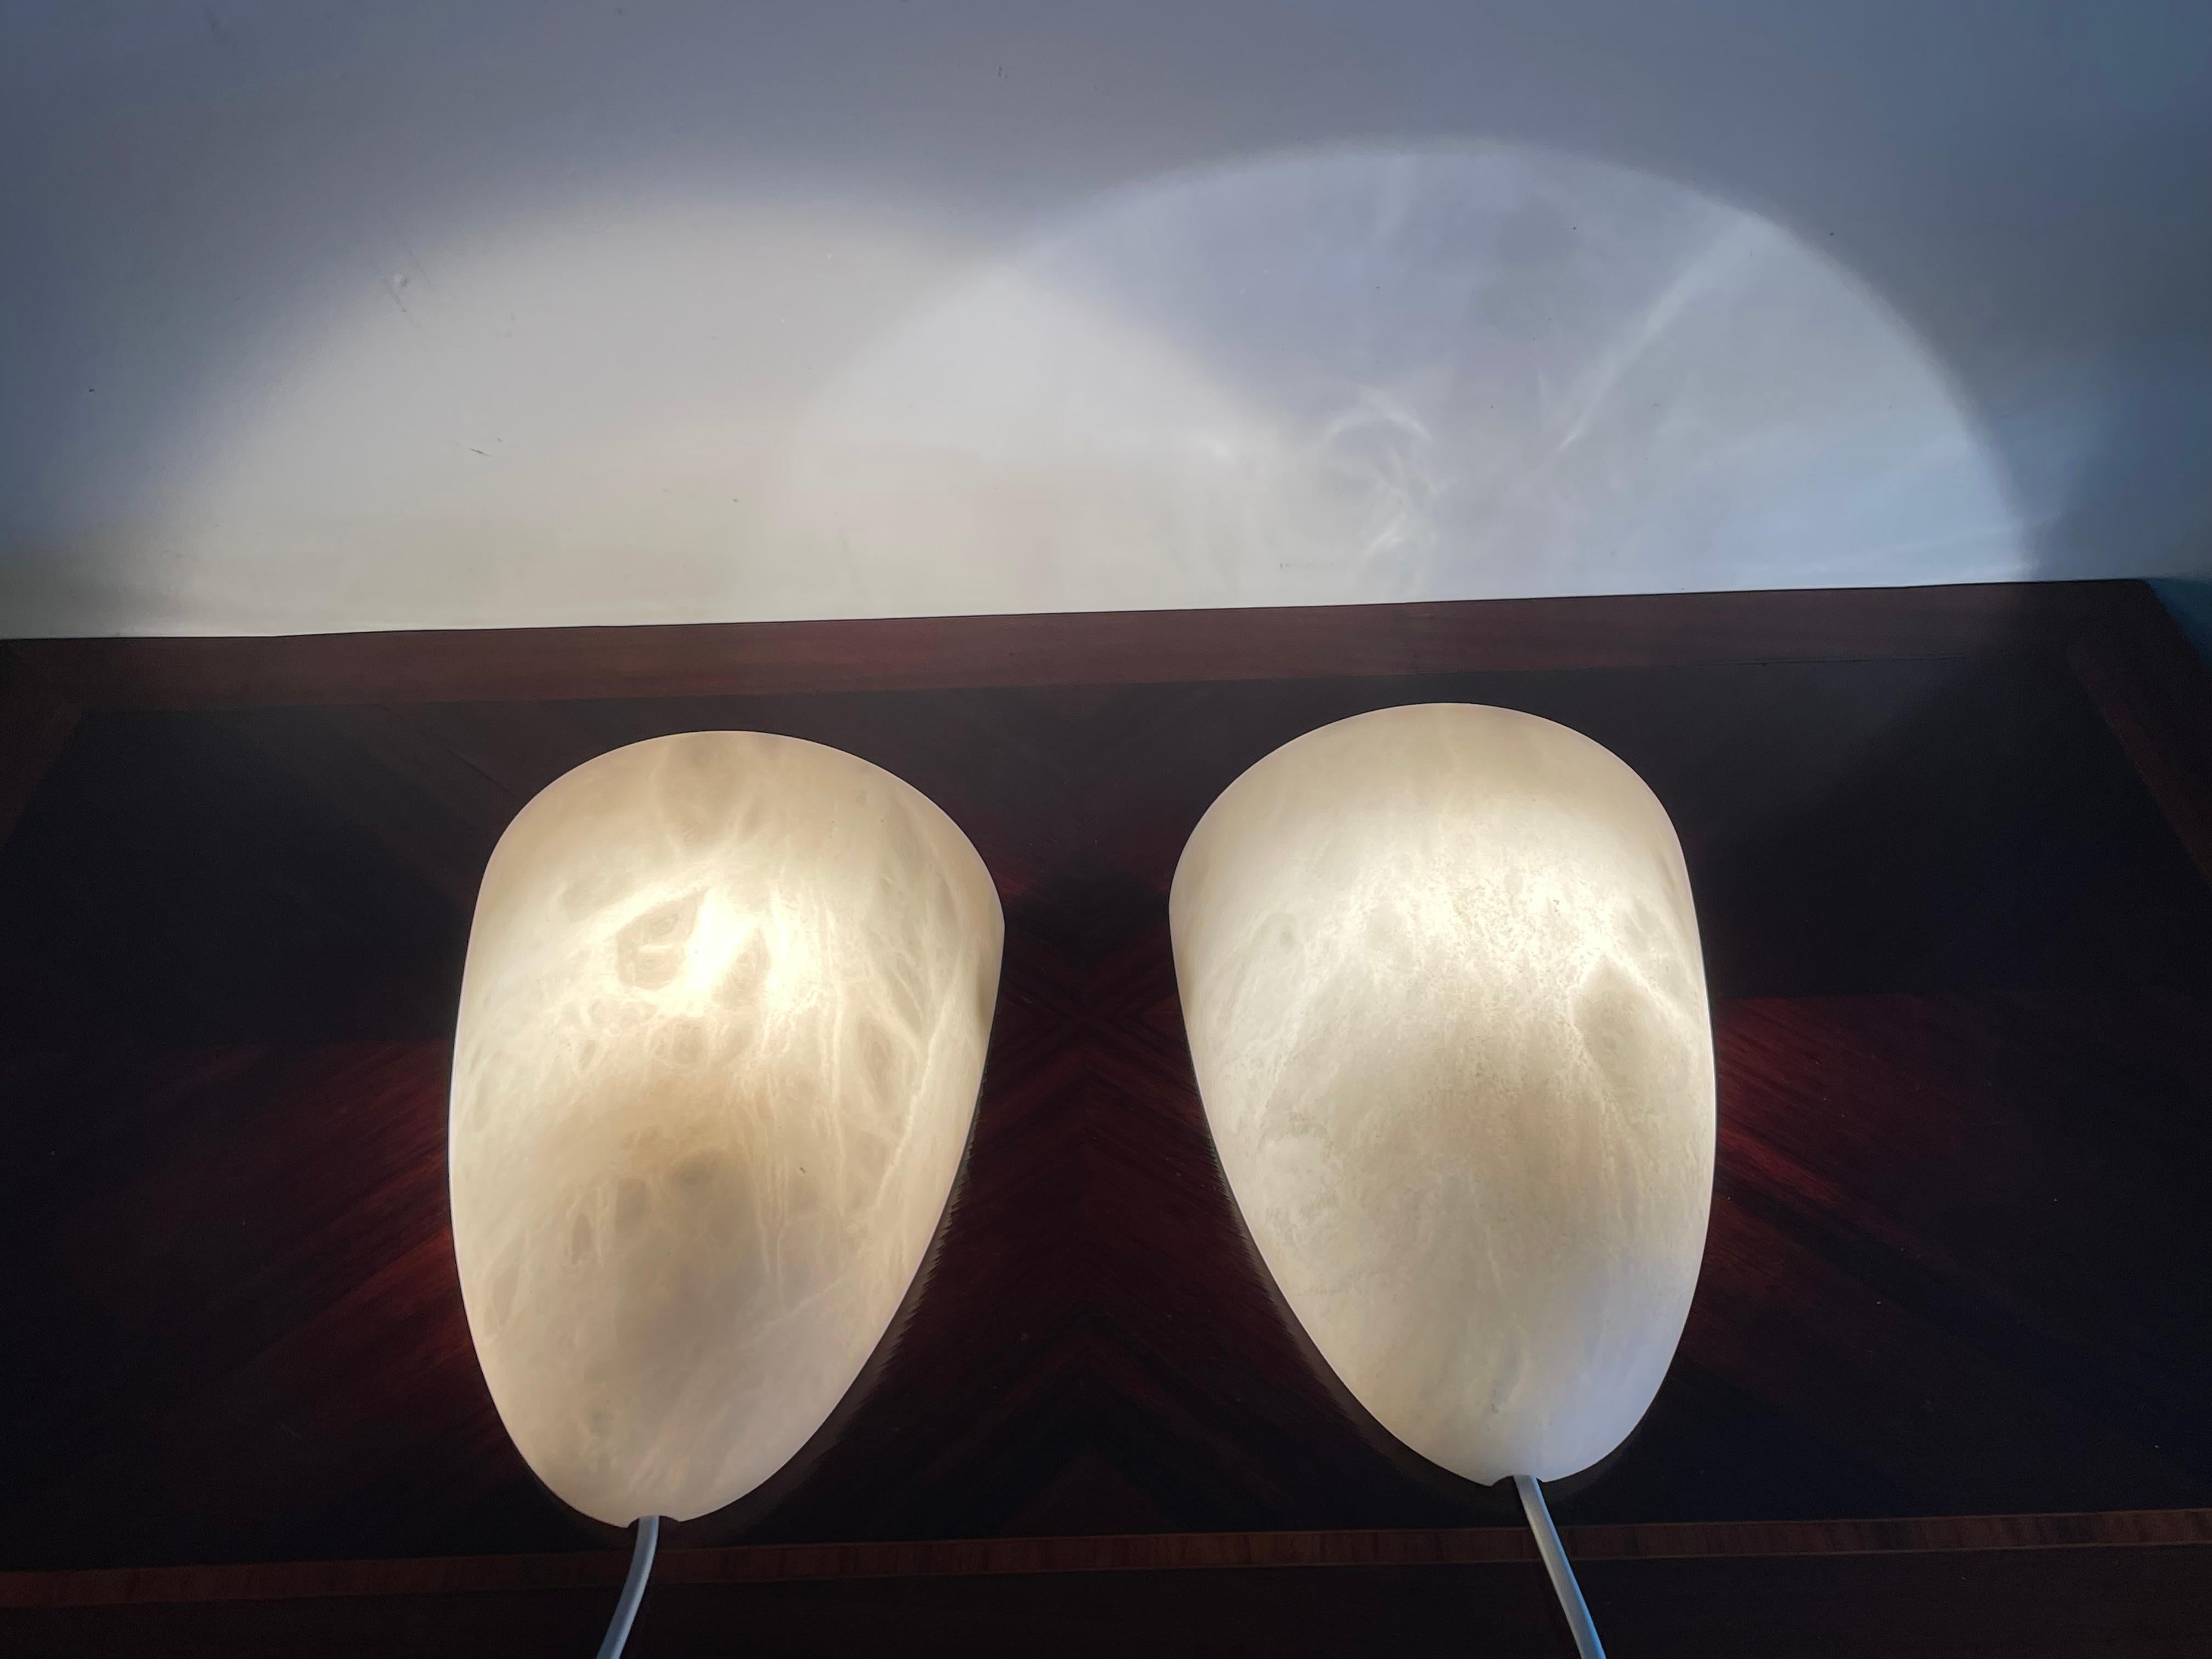 Two handcrafted and very stylish pairs of midcentury made alabaster wall lights.

If you are looking for a great shape and practical size pair (or two pairs) of sconces to grace your living space then these natural mineral stone fixtures could be